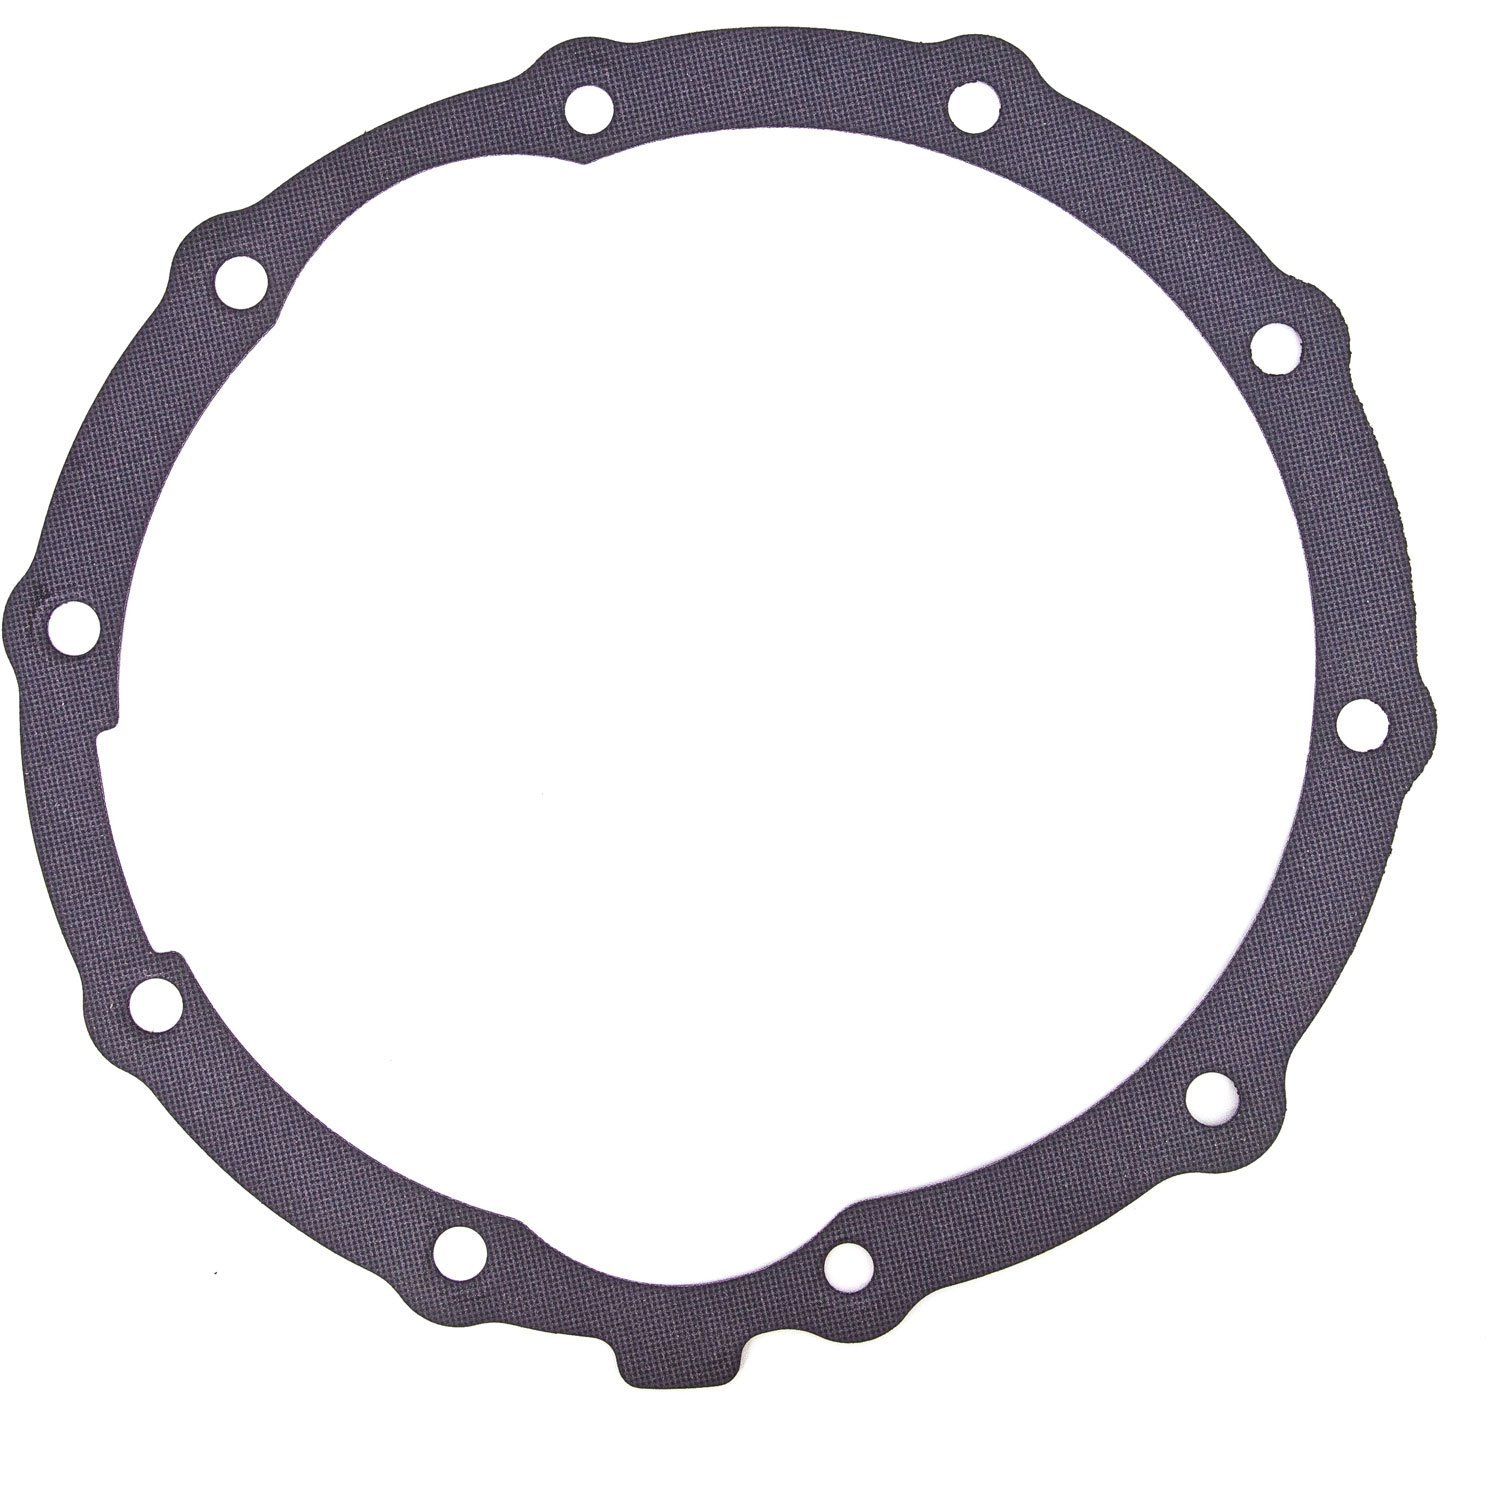 Differential Gasket Ford 9"